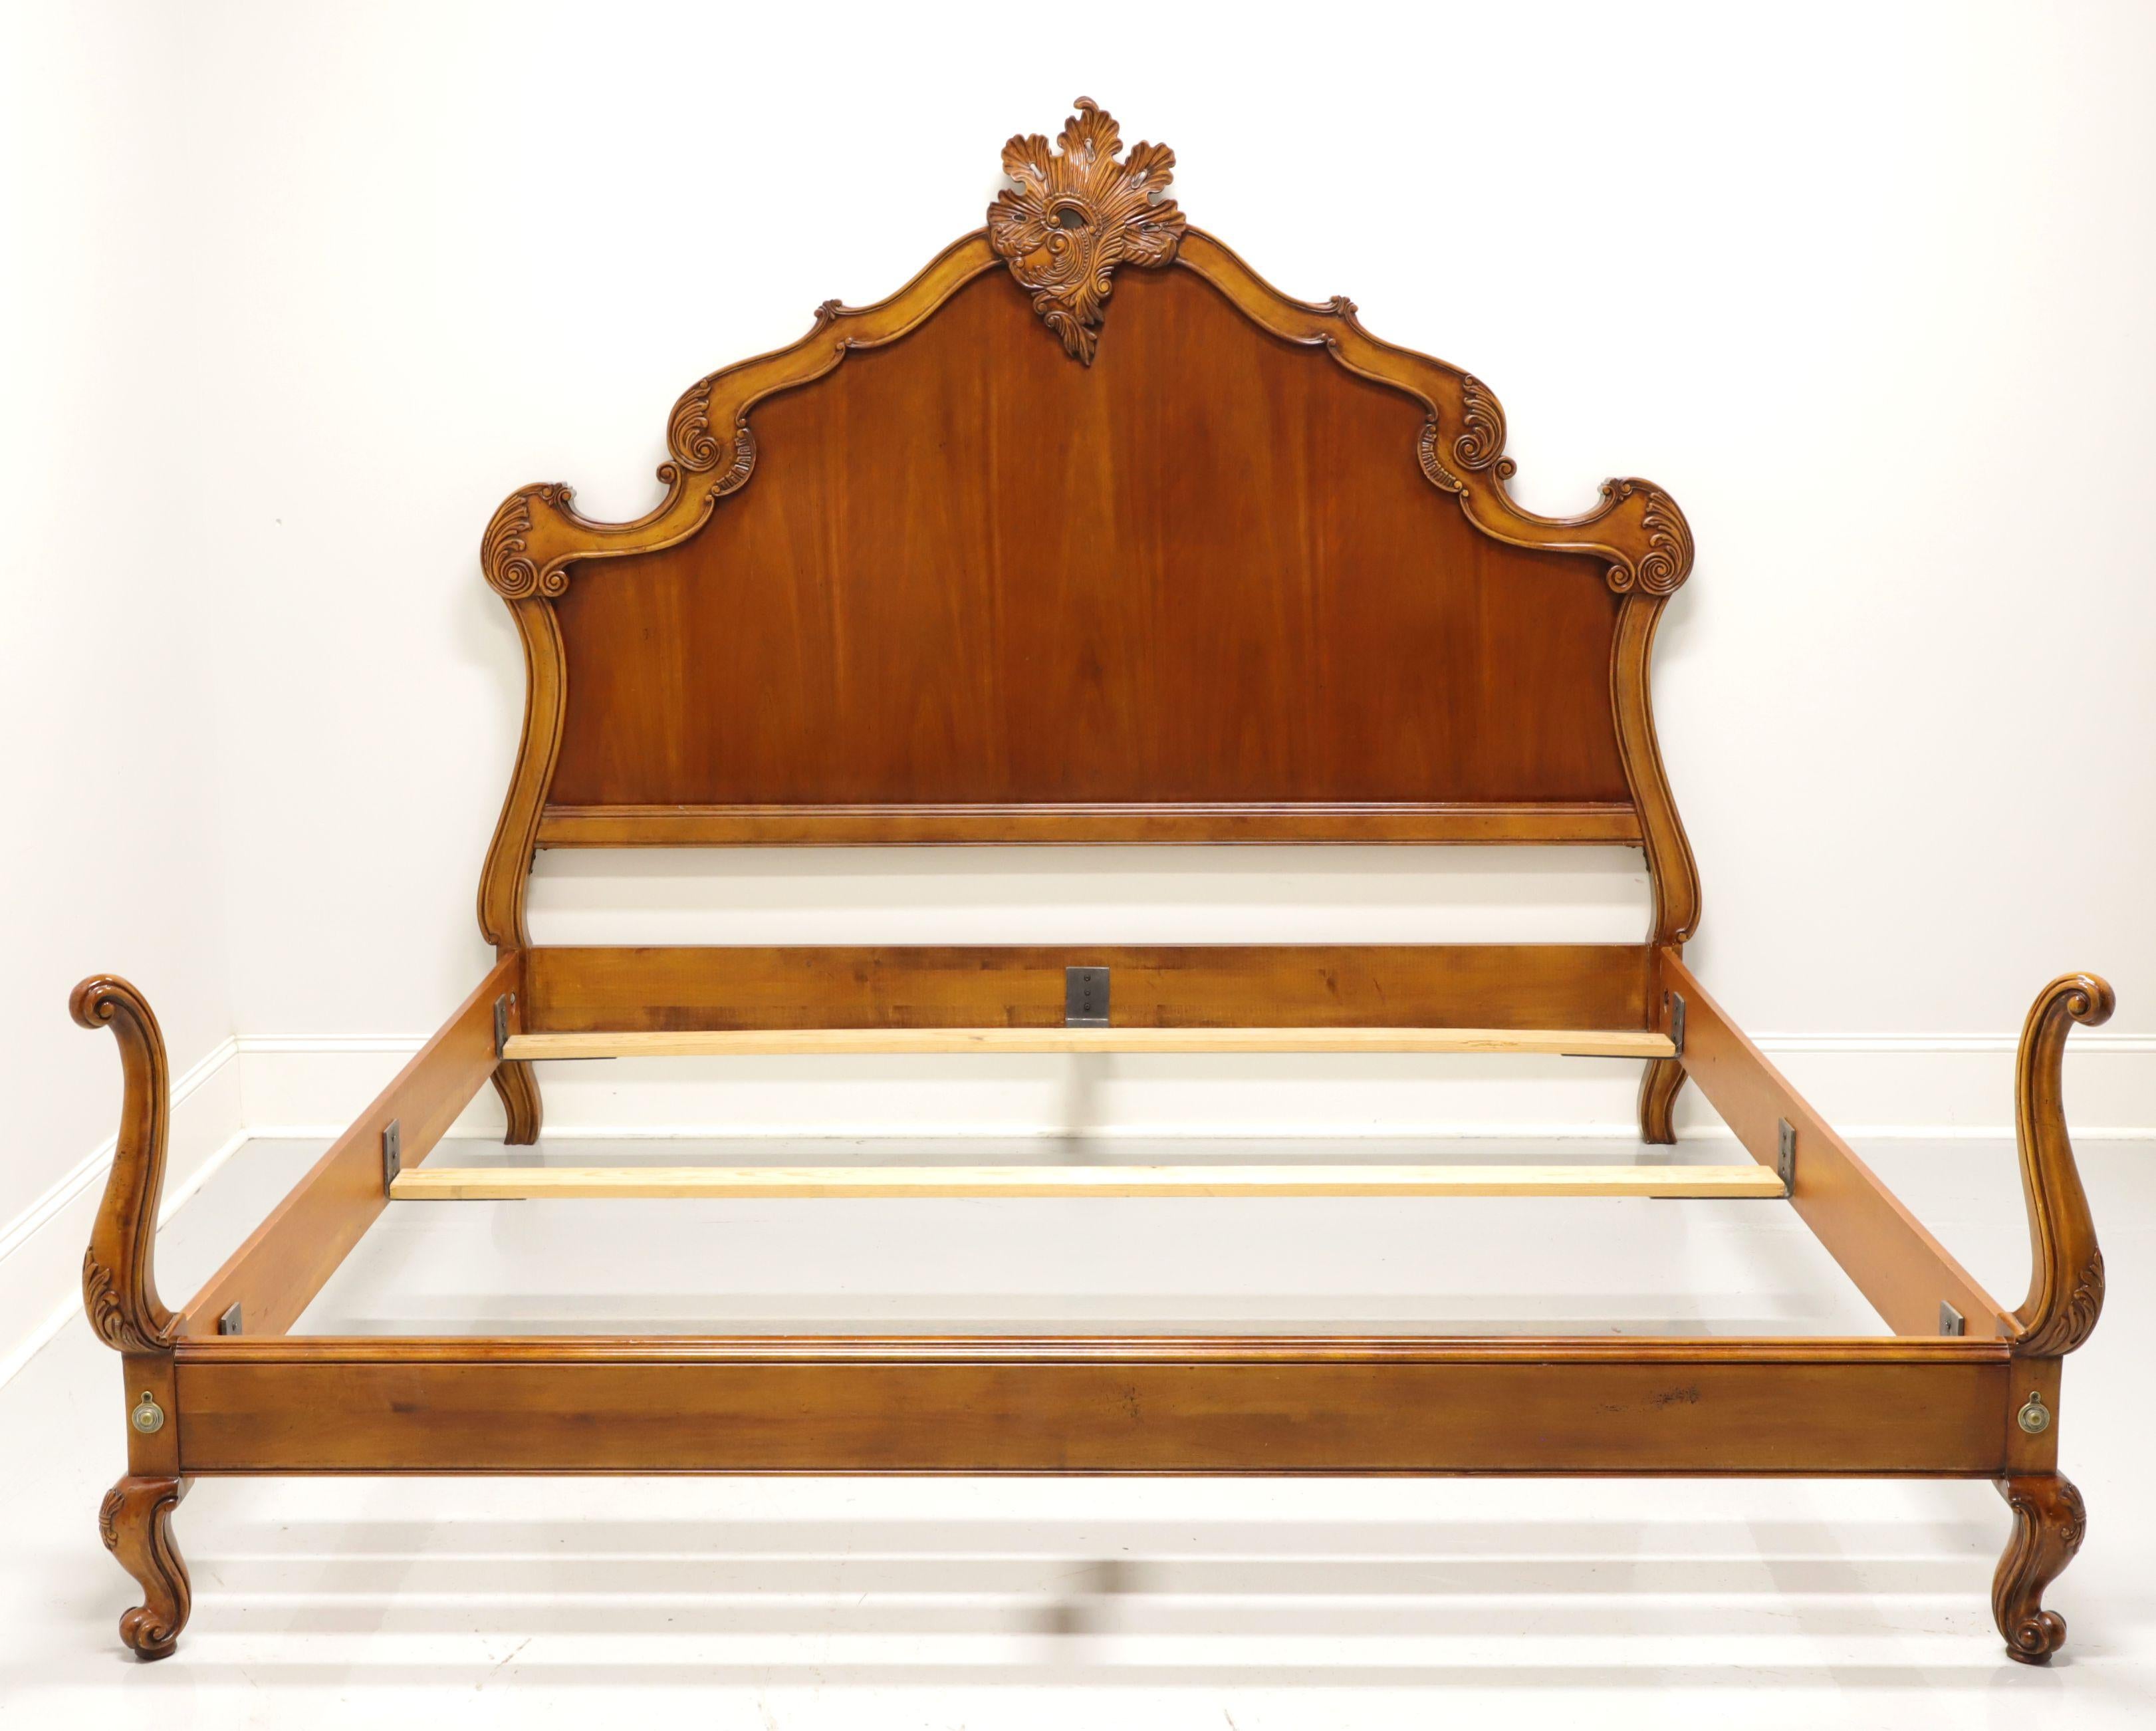 A French Country style king size bed by Hickory Chair, from their French Collection. Decoratively carved solid wood headboard and footboard with their 